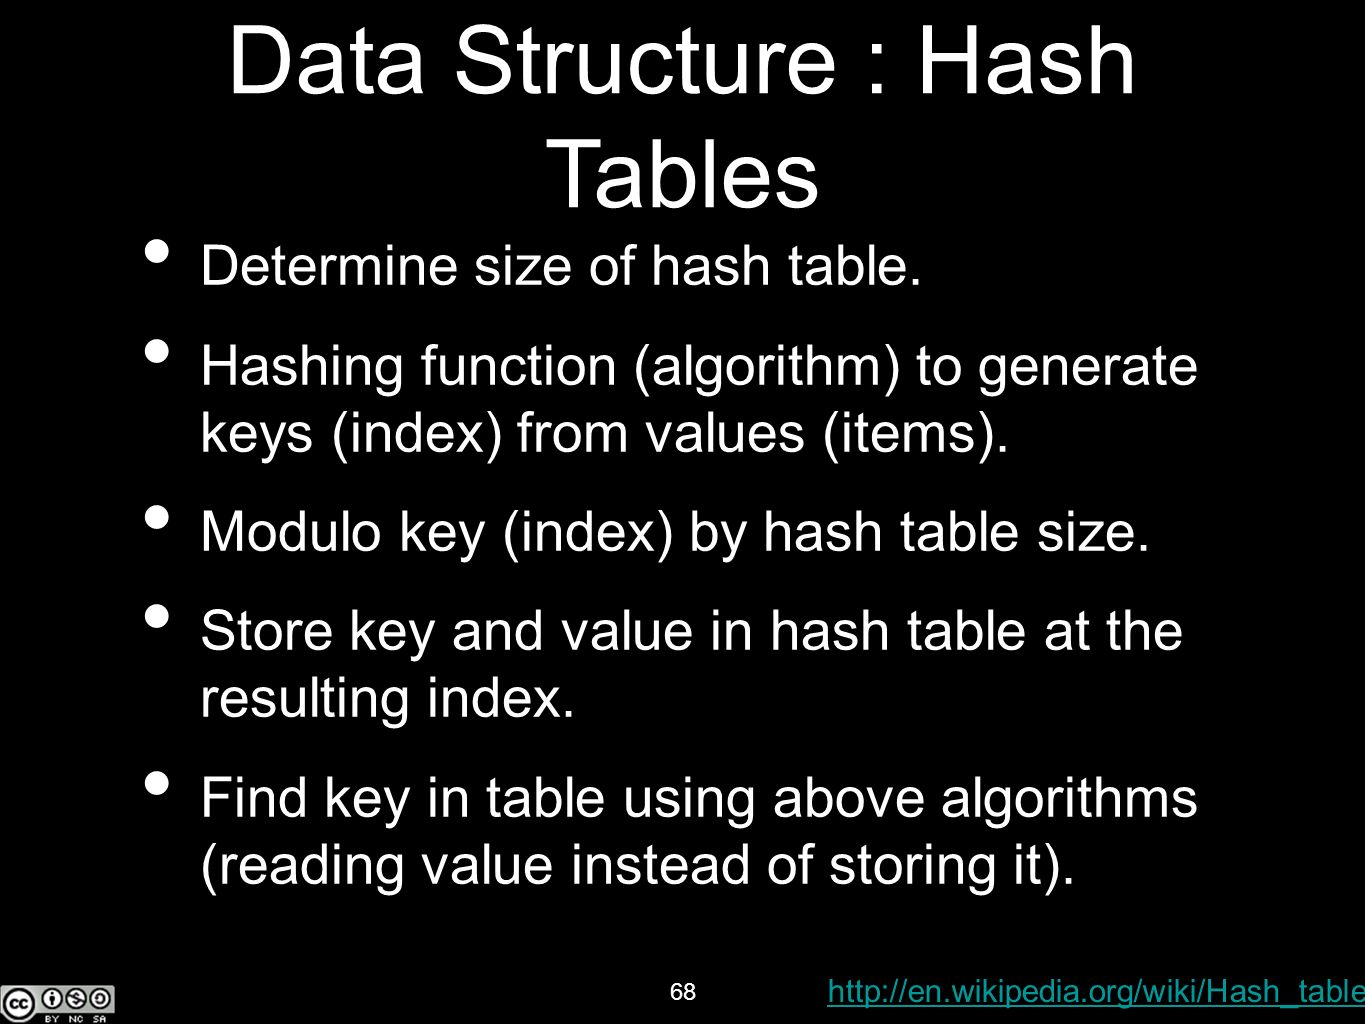 68 Data Structure : Hash Tables Determine size of hash table.